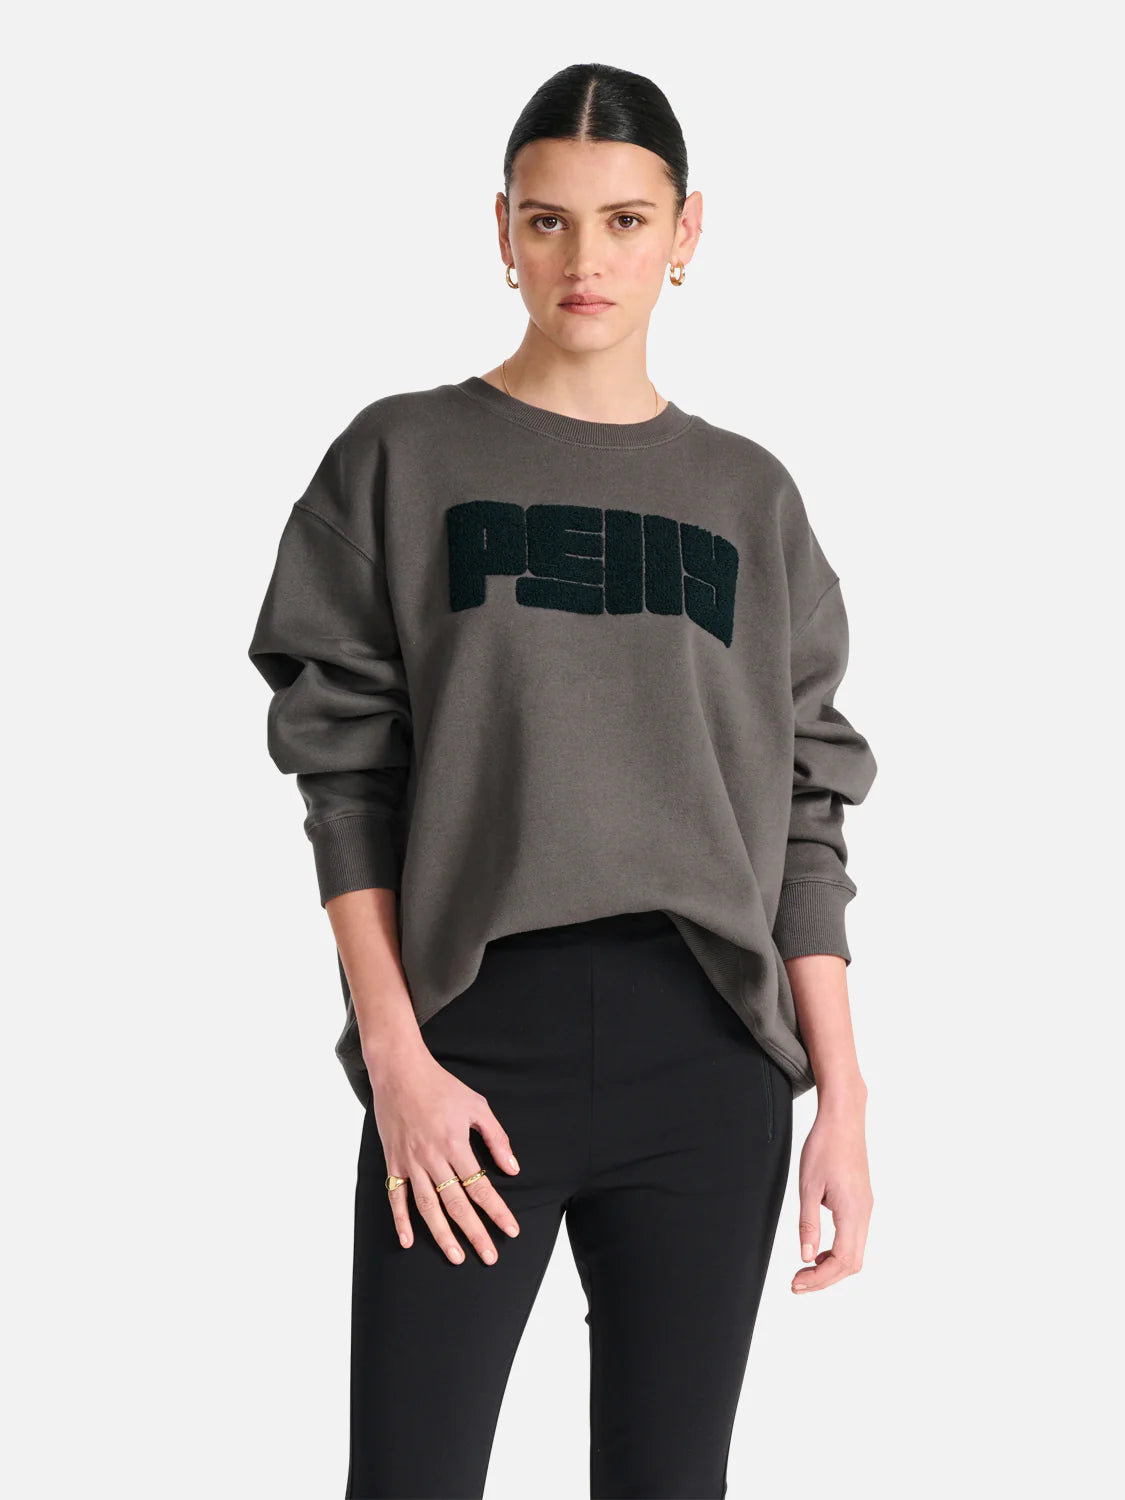 ENA PELLY  Pelly Text Sweater